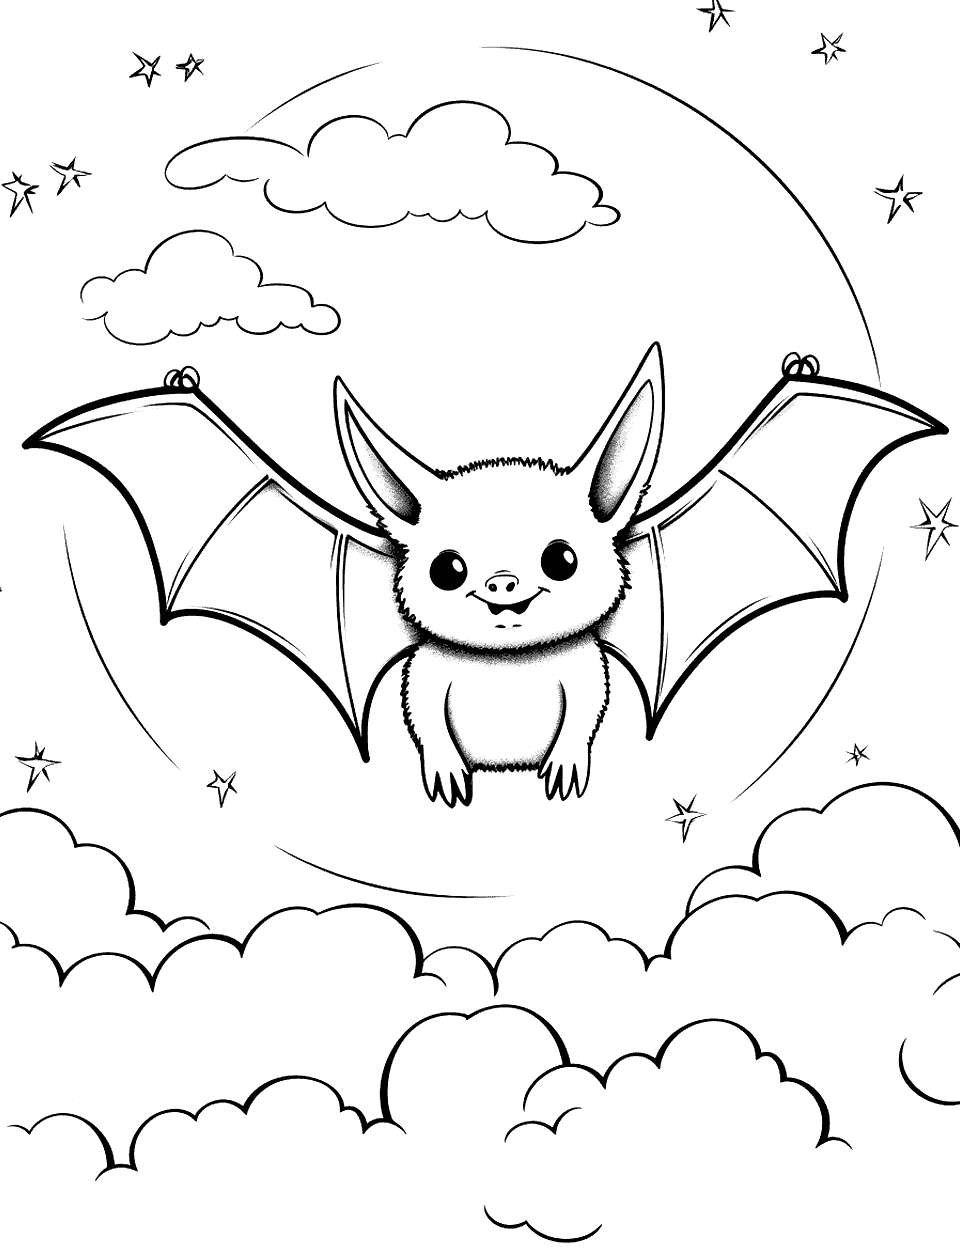 Small Bat in a Big World Coloring Page - A bat in a vast sky flying alone for its destination.